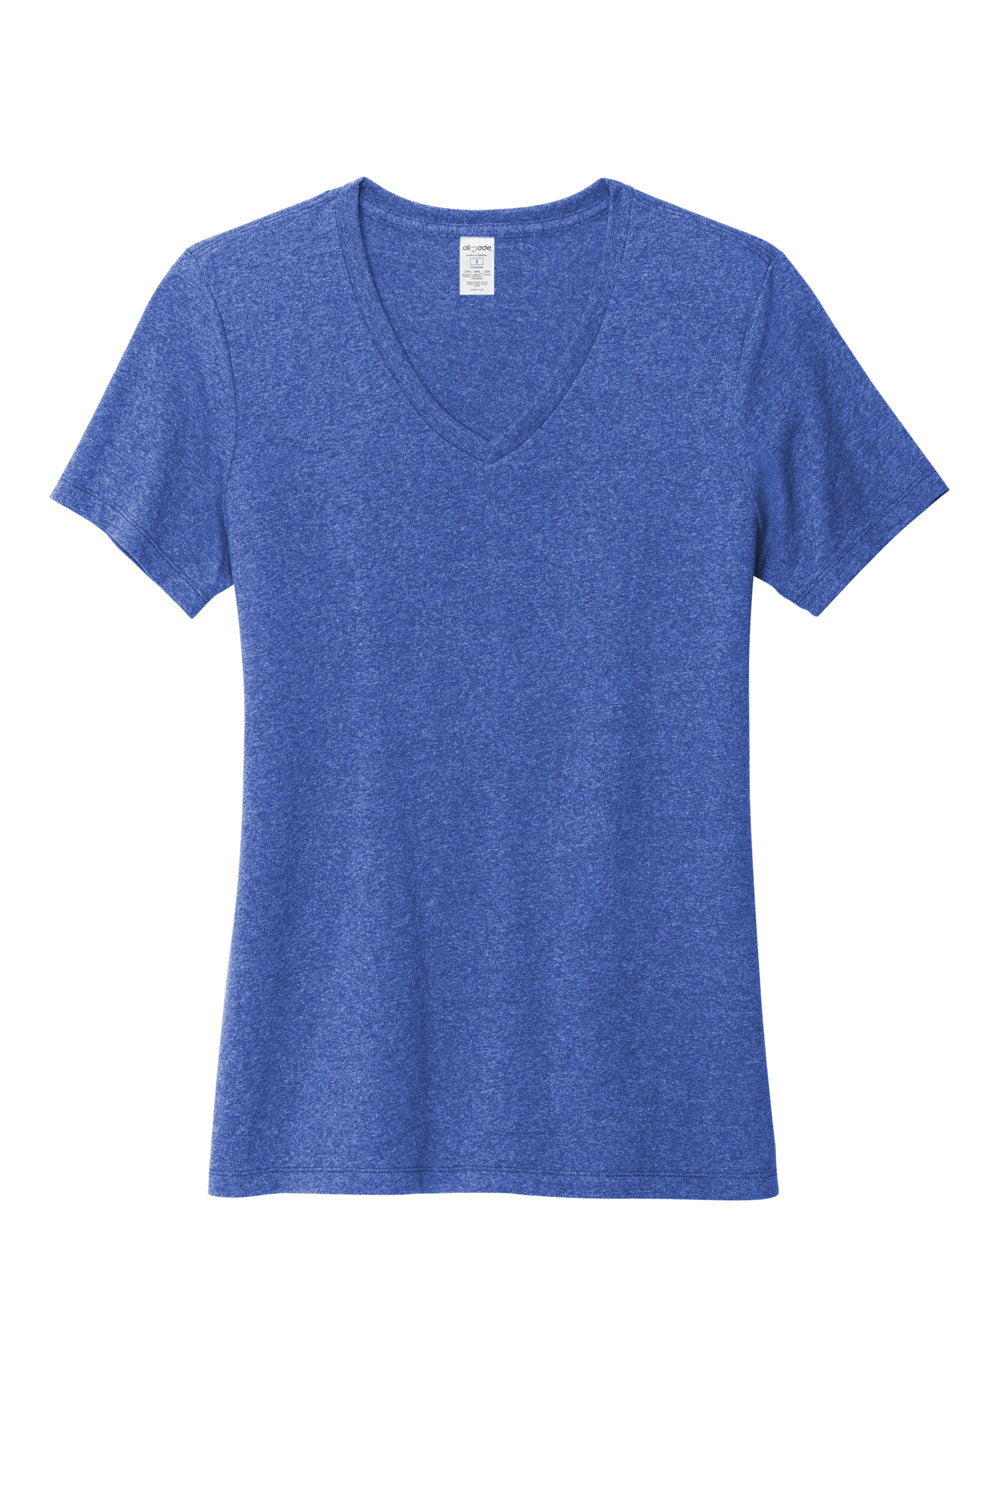 Allmade AL2303 Womens Recycled Short Sleeve V-Neck T-Shirt Heather Royal Blue Flat Front